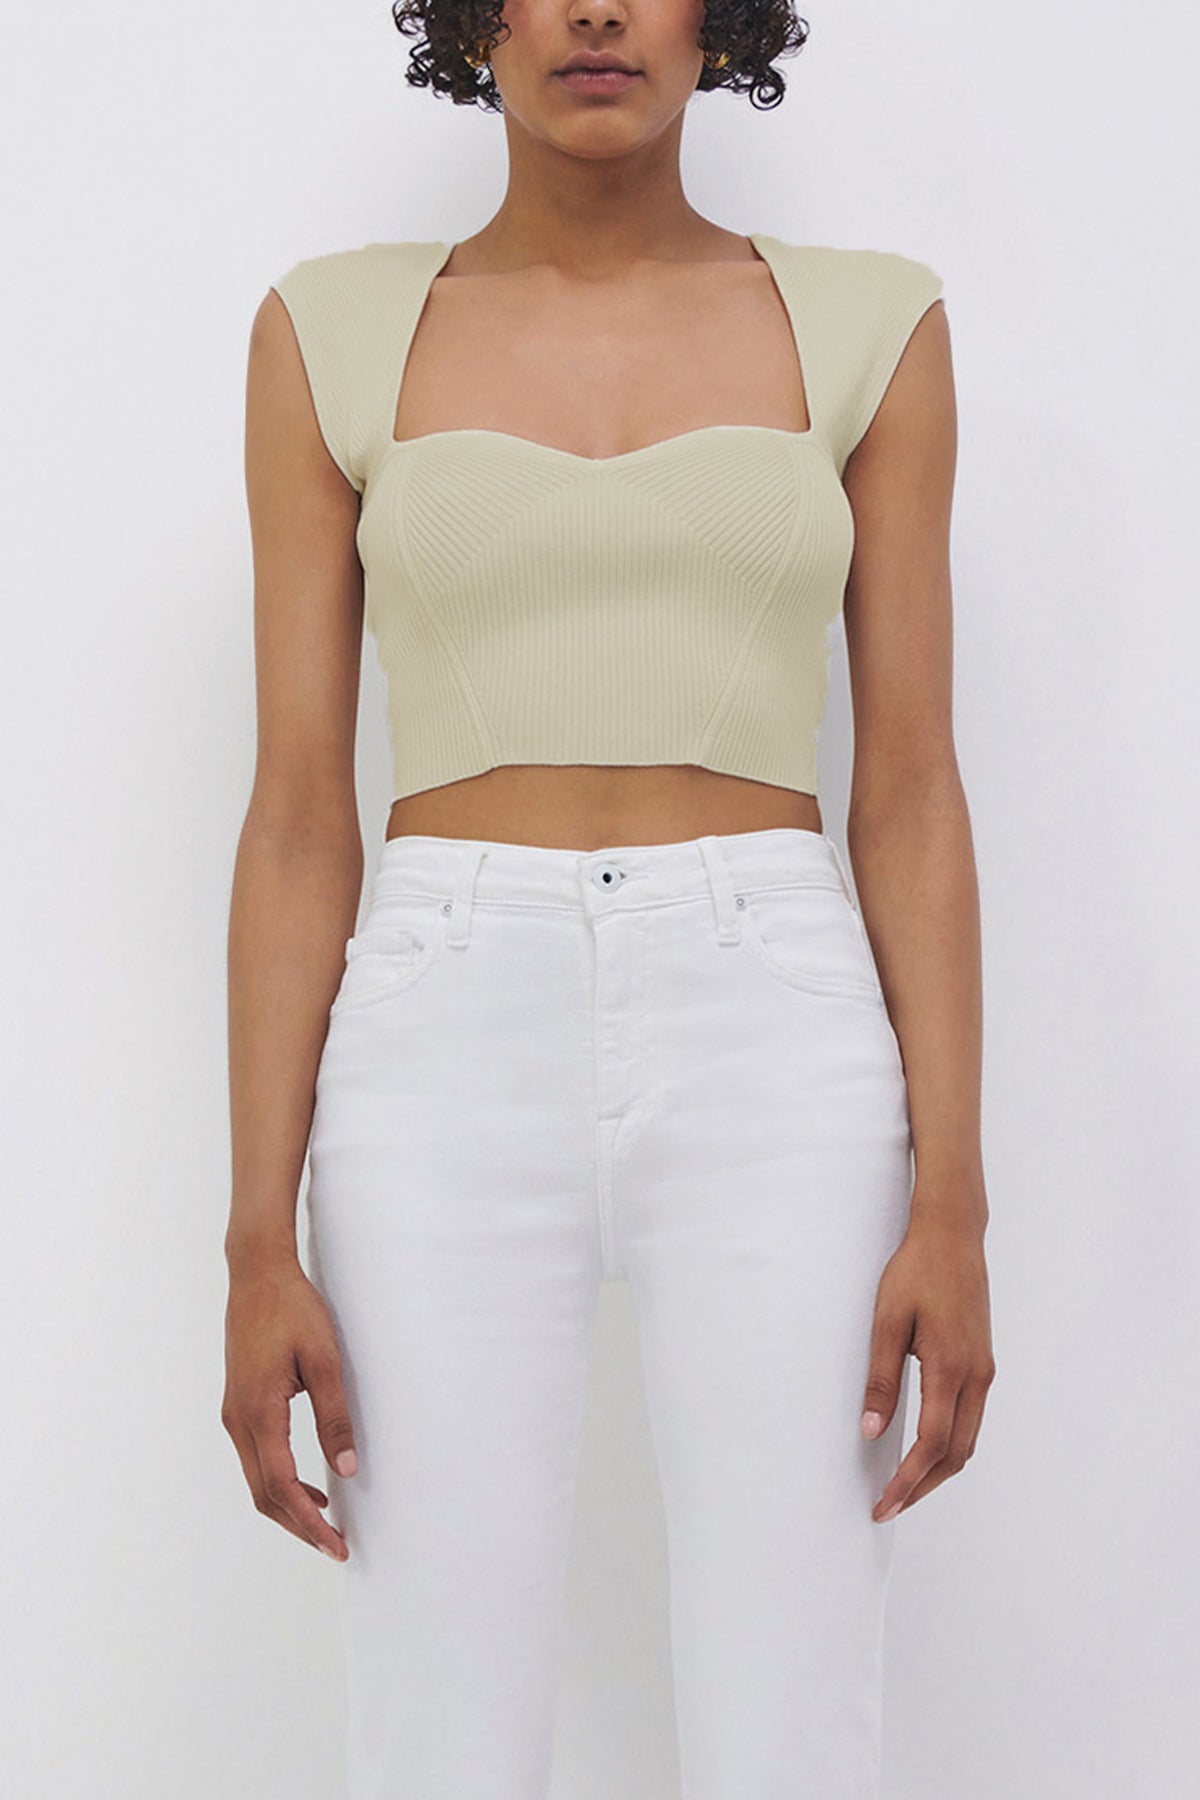 Abia Cropped Top in Almond - shop-olivia.com